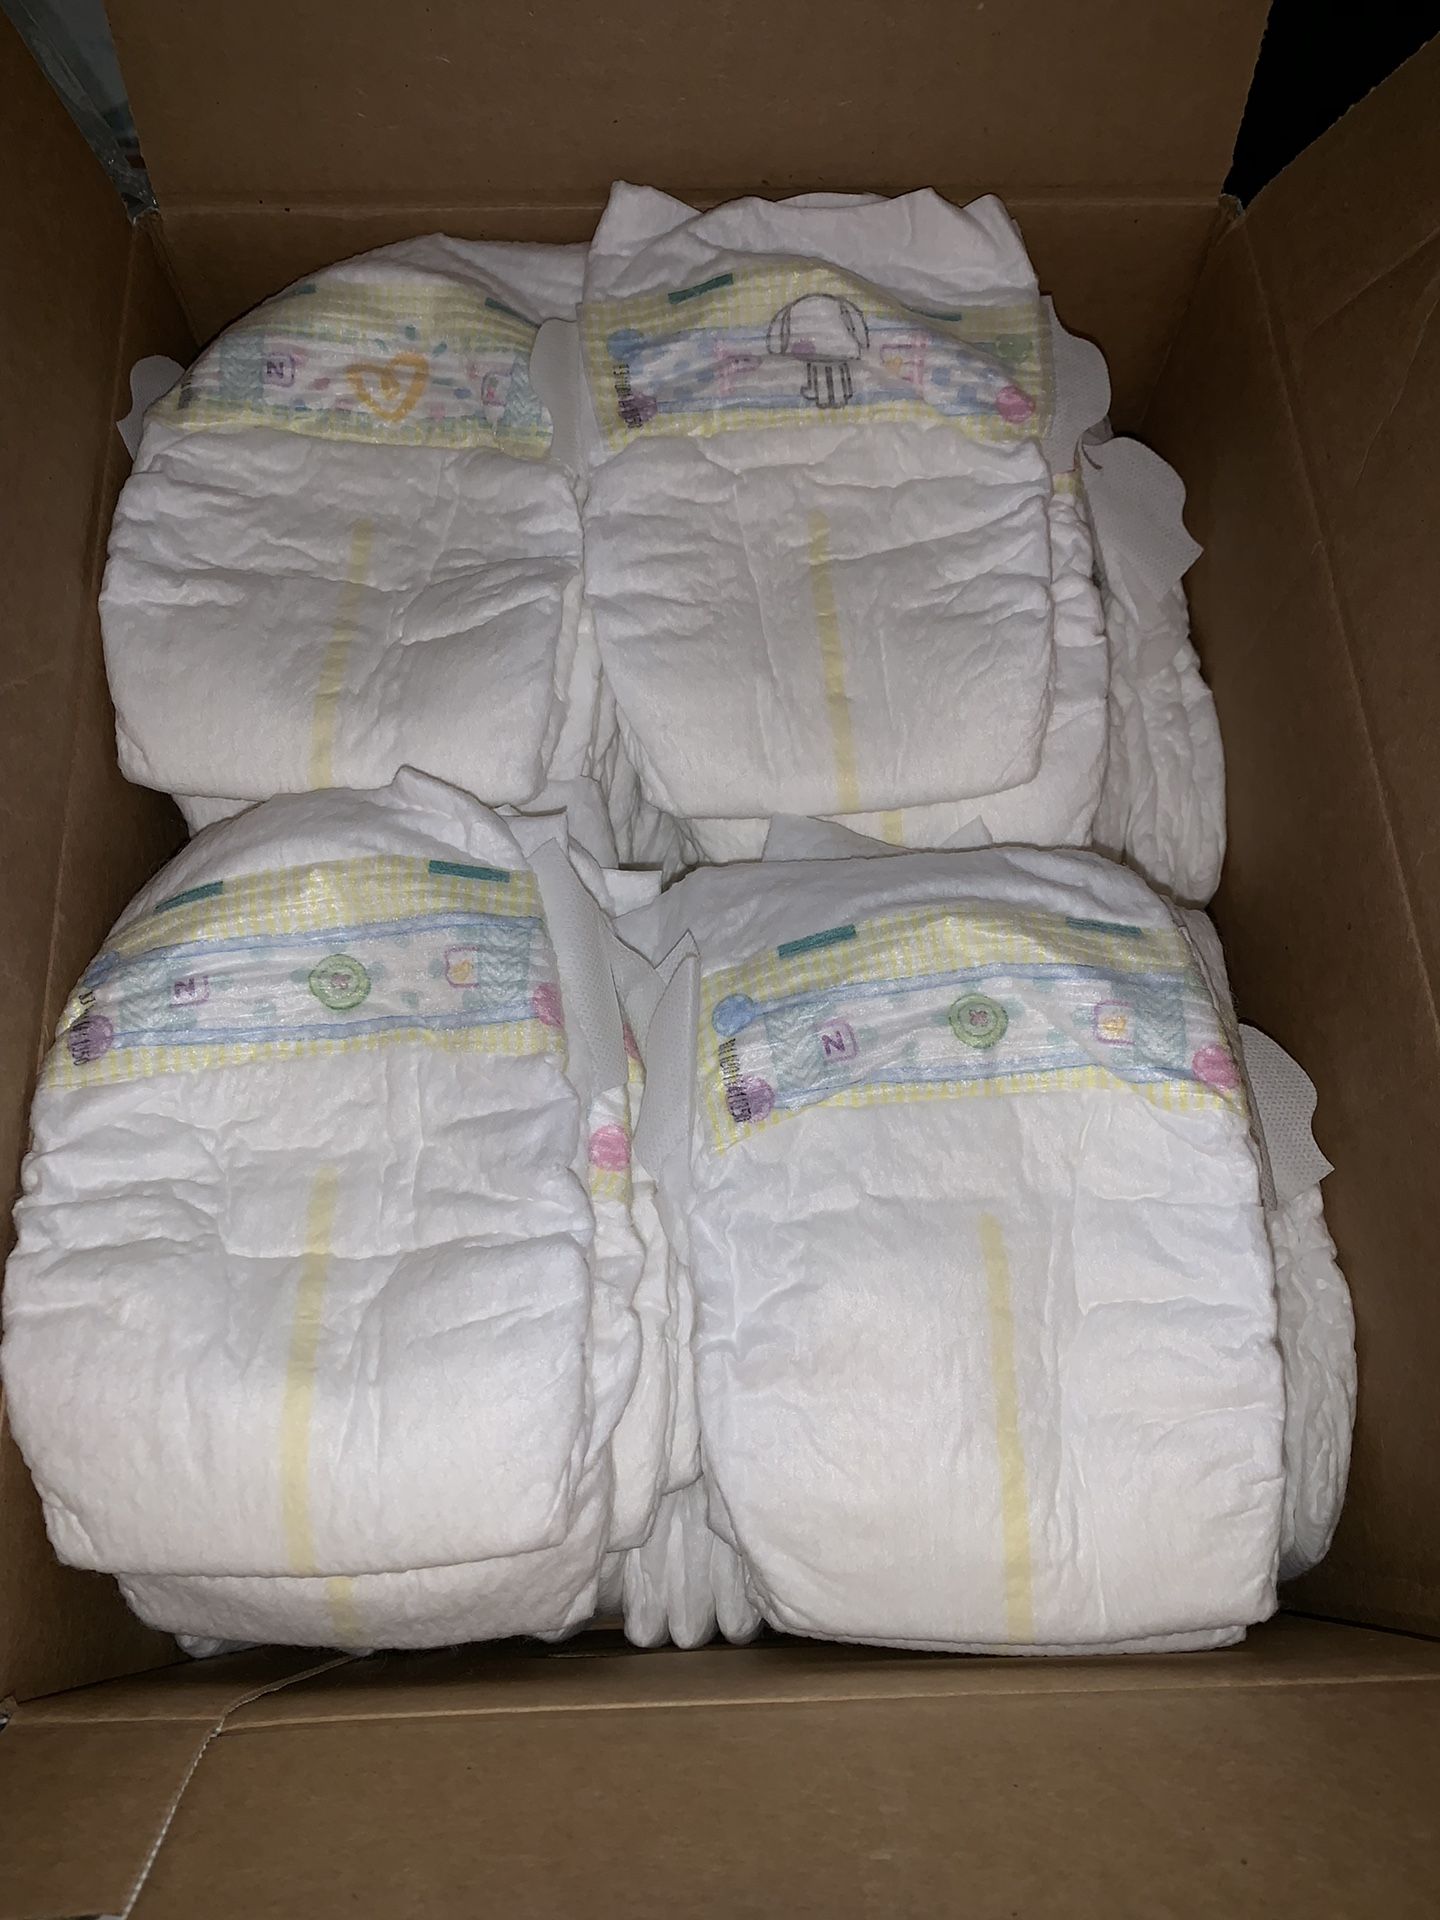 223 new newborn pampers diapers